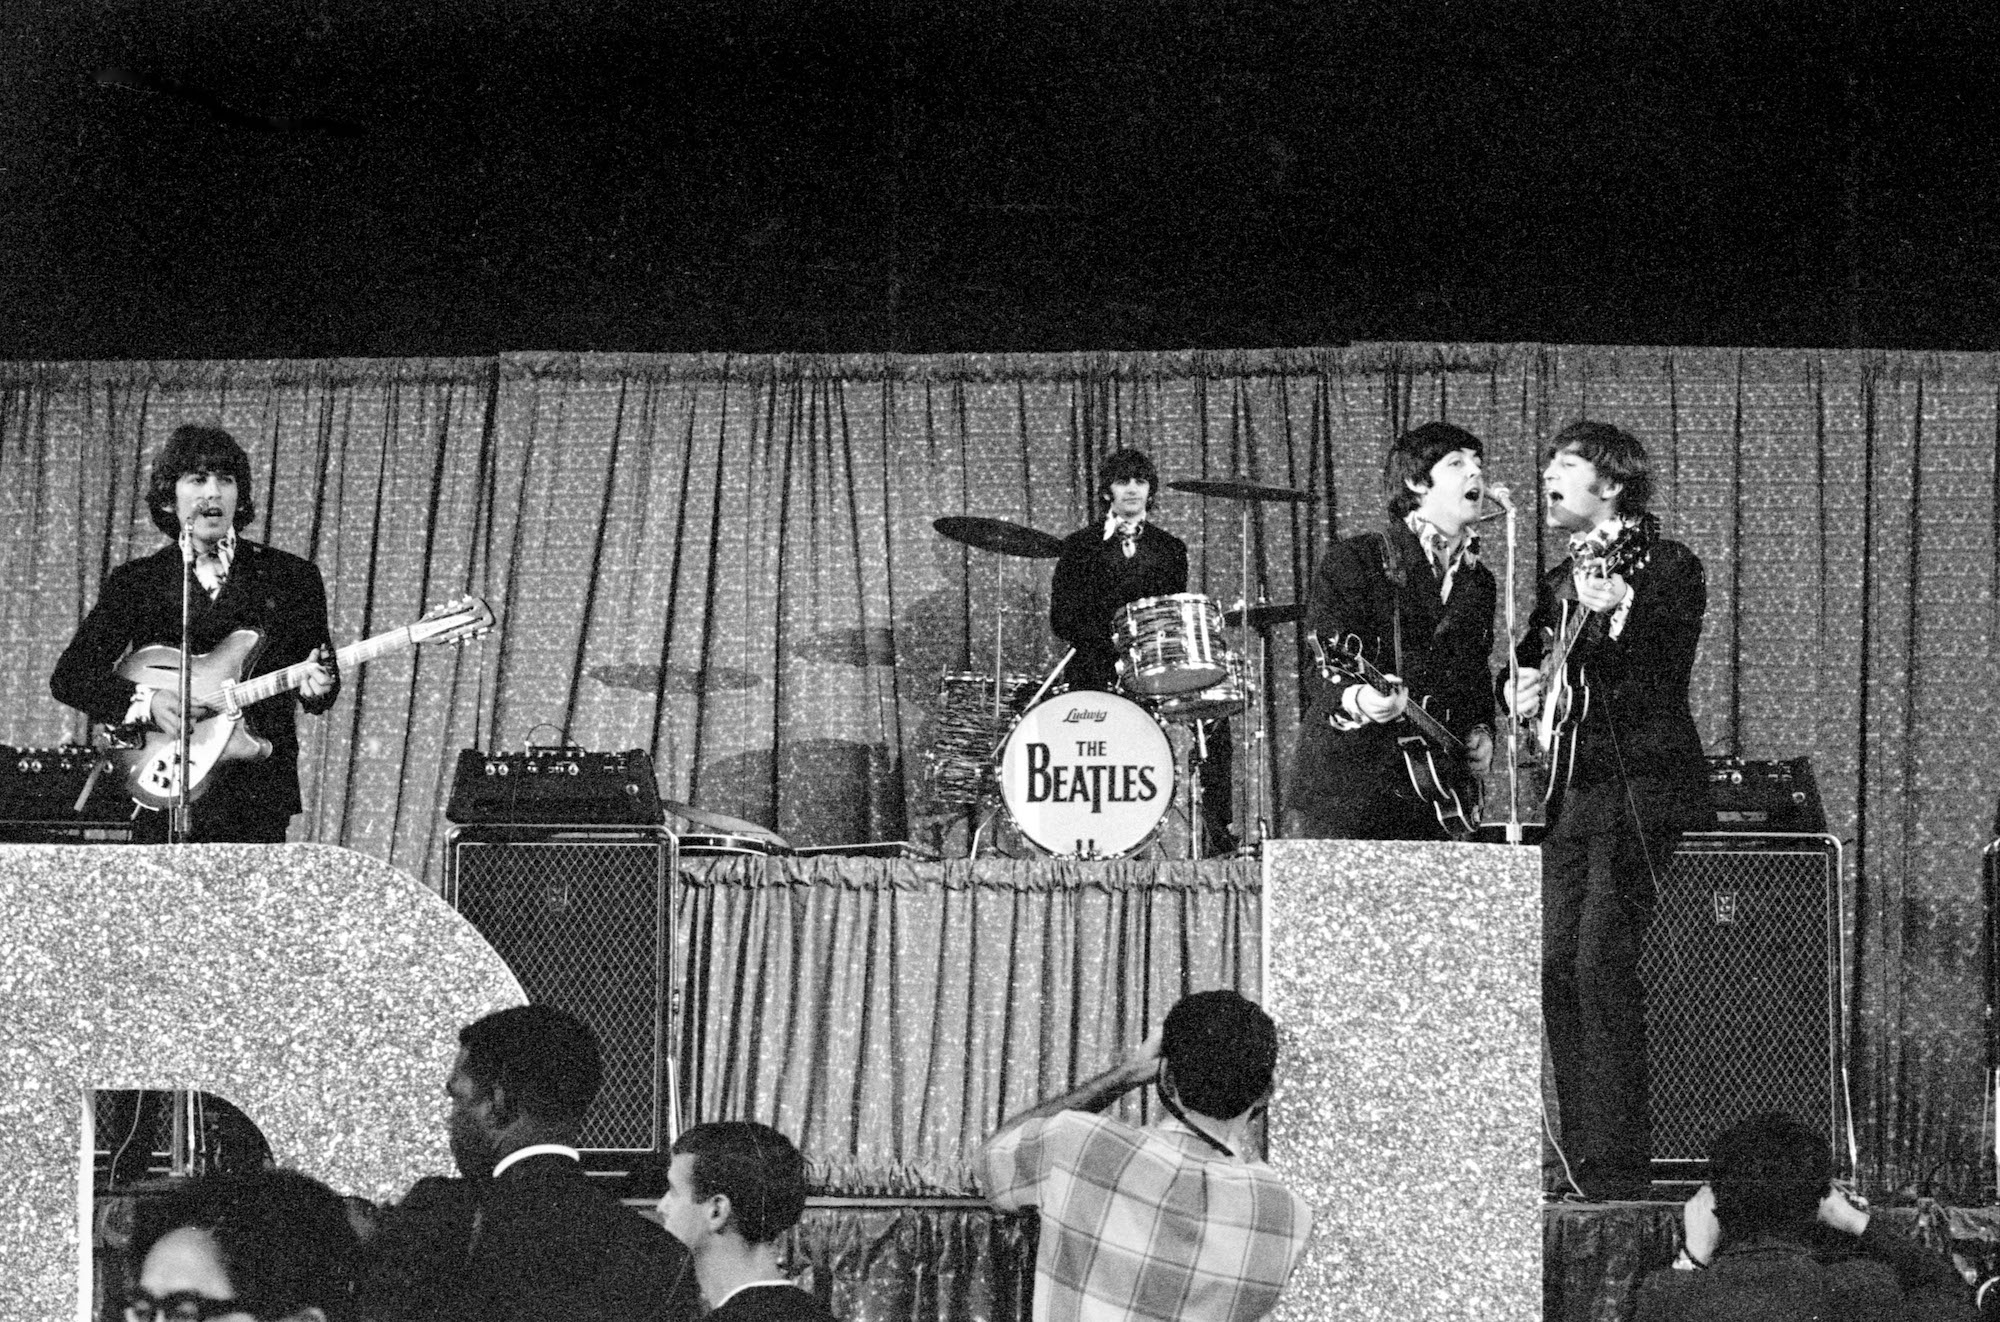 Elvis Introduced The Beatles to ‘Amazing’ New Technology That Had Nothing to Do With Music